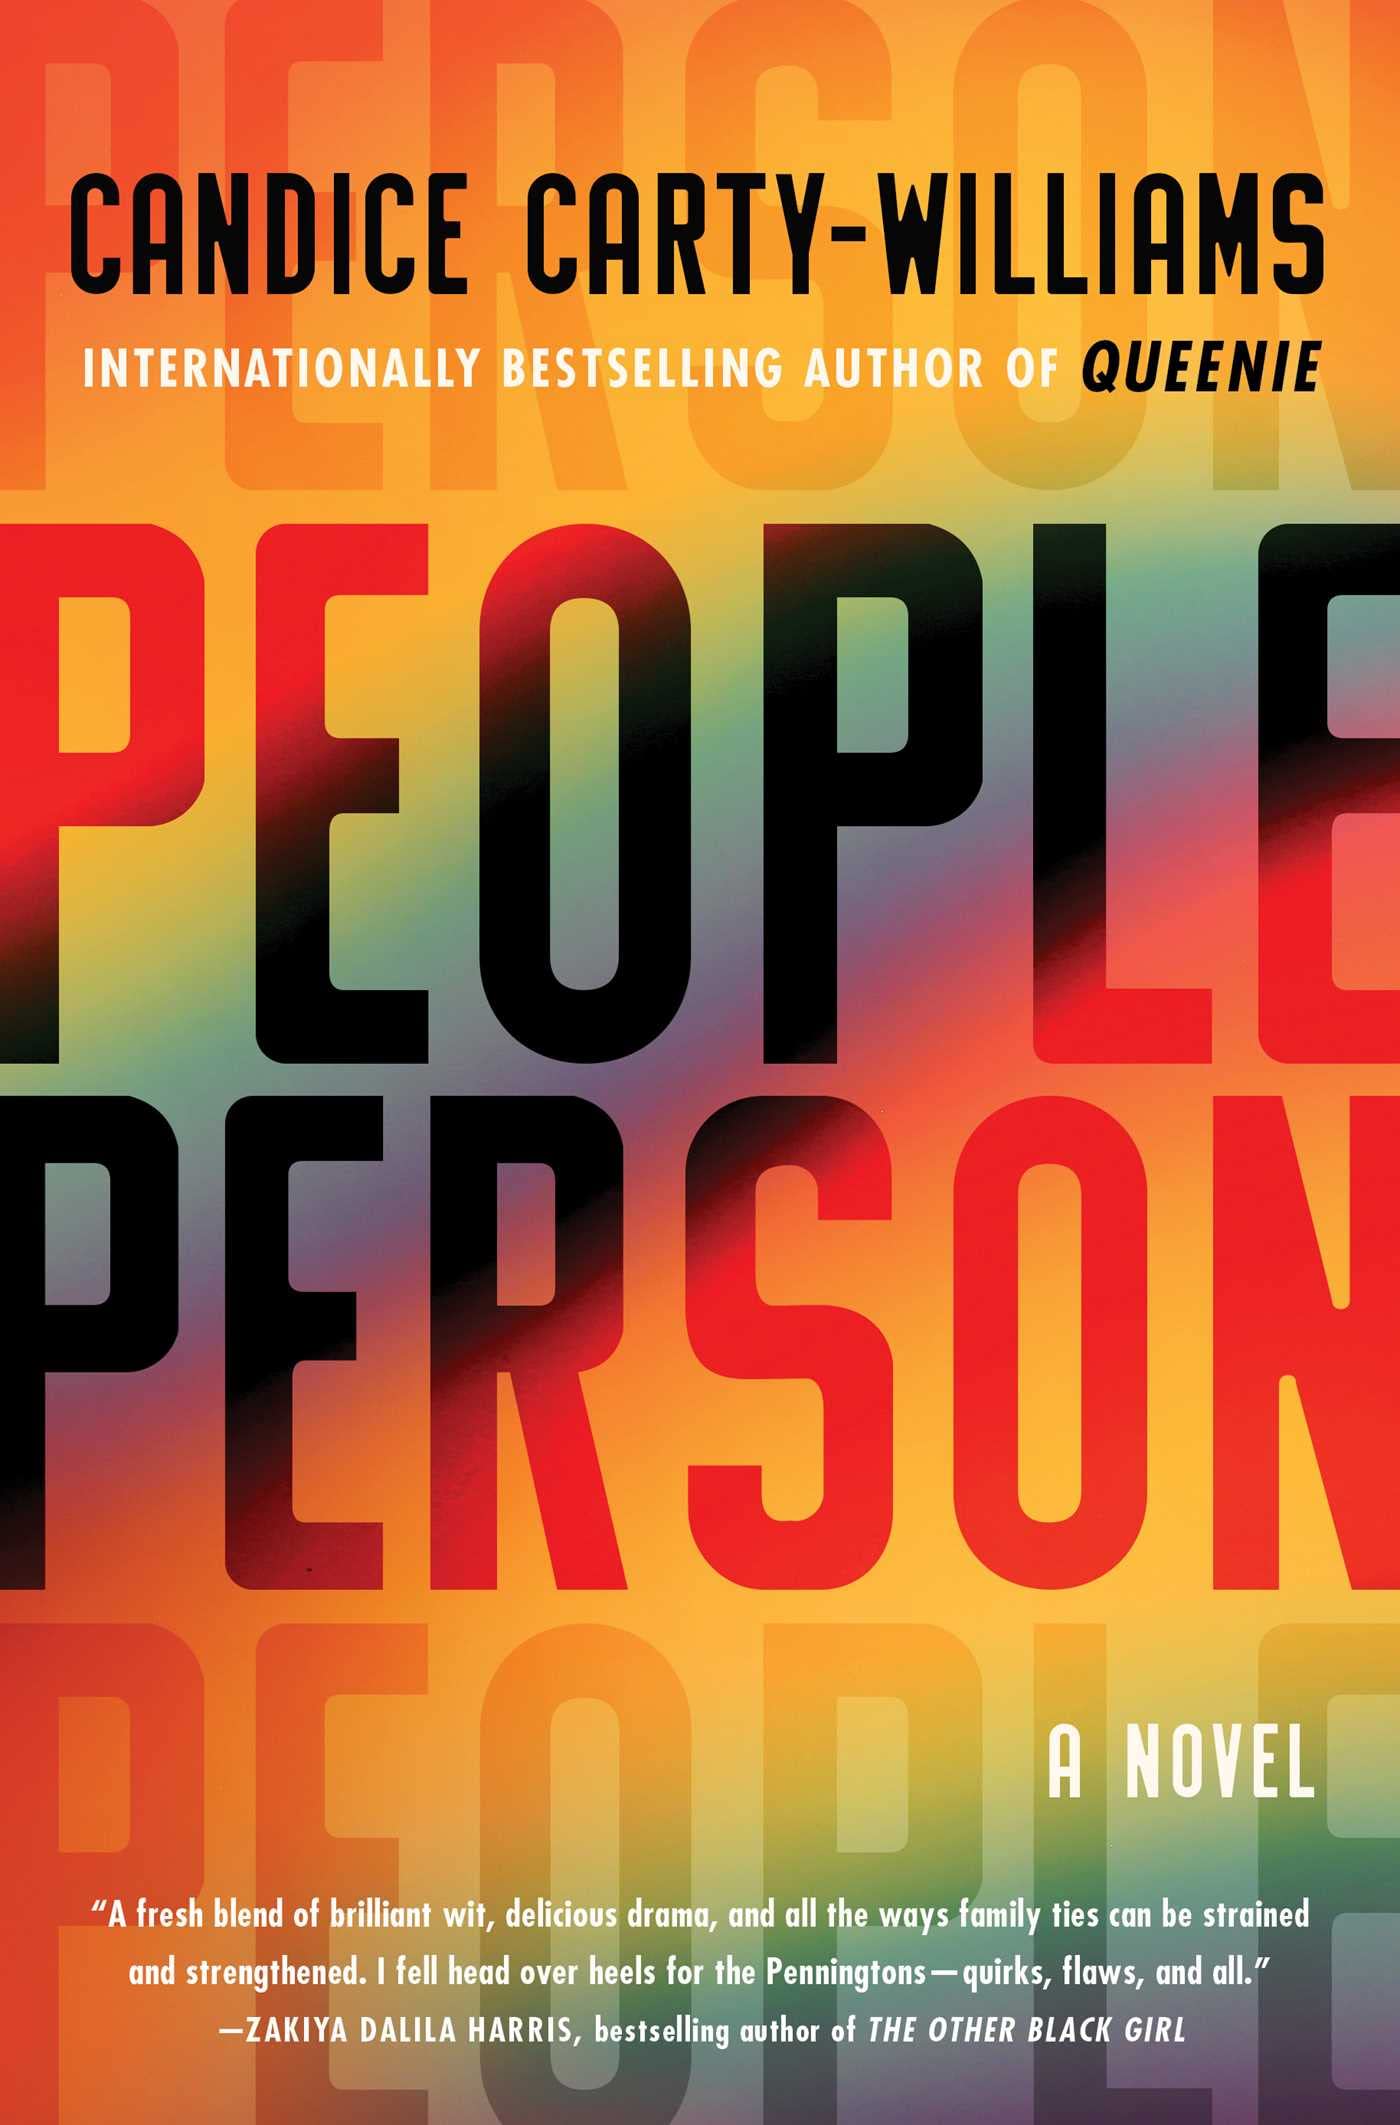 A graphic of the cover of People Person